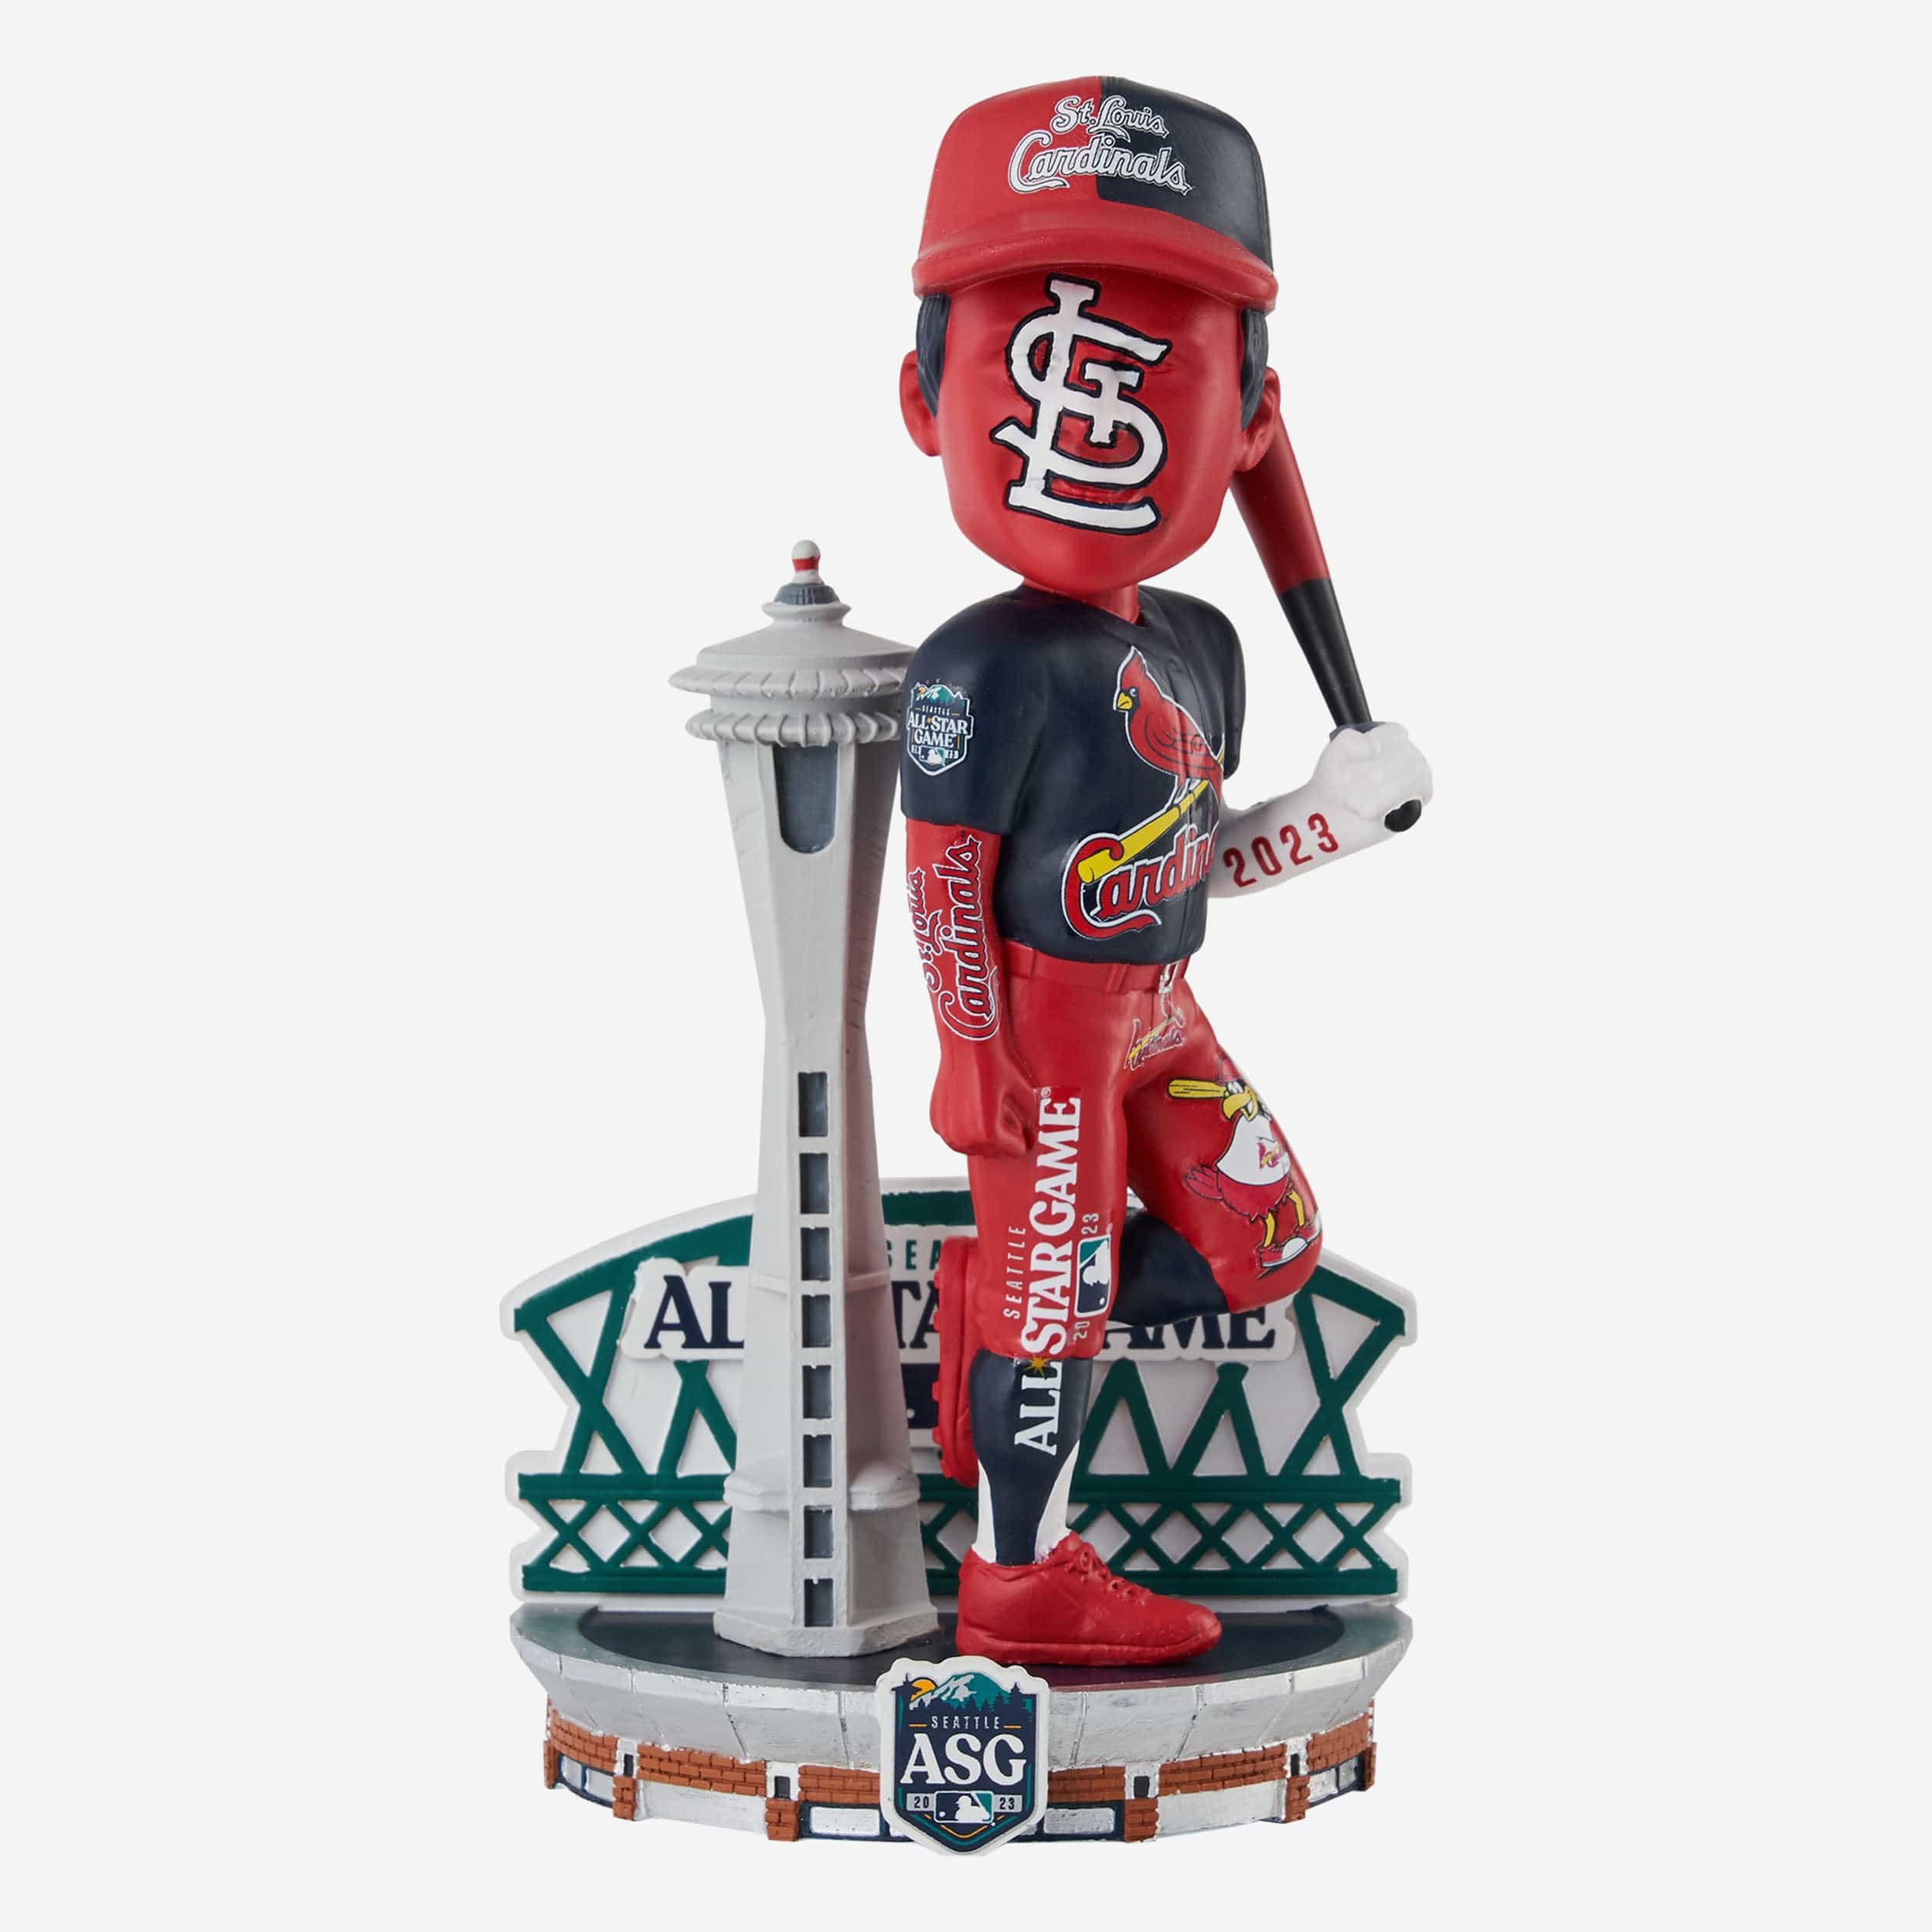 St Louis Cardinals bobbleheads prices vary - Sports Trading Cards